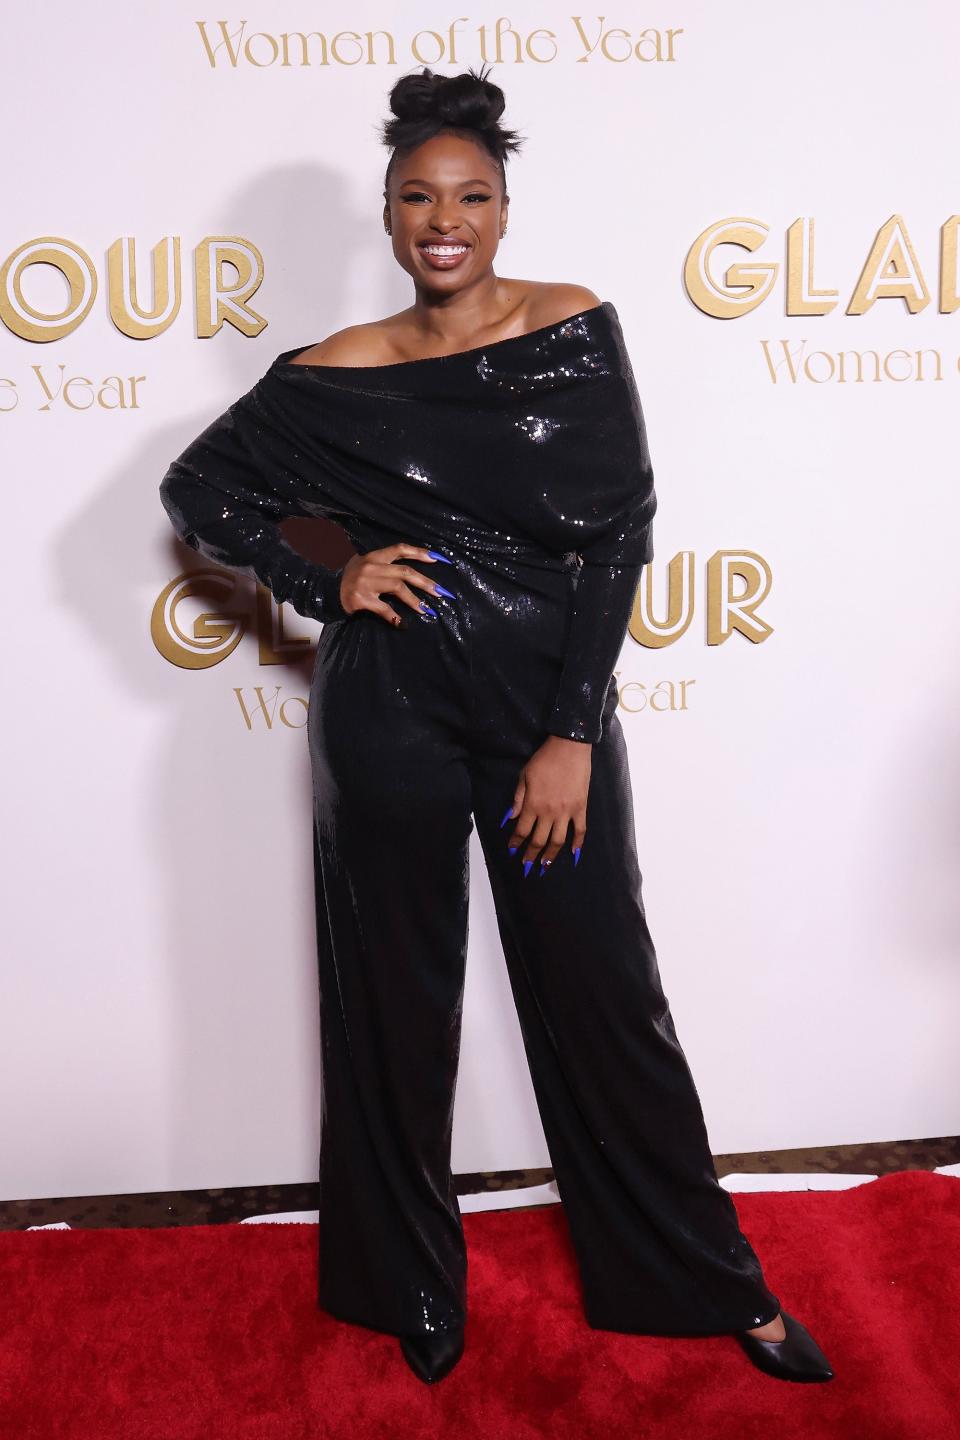 The Best Moments From Glamour ’s 2022 Women of the Year Awards